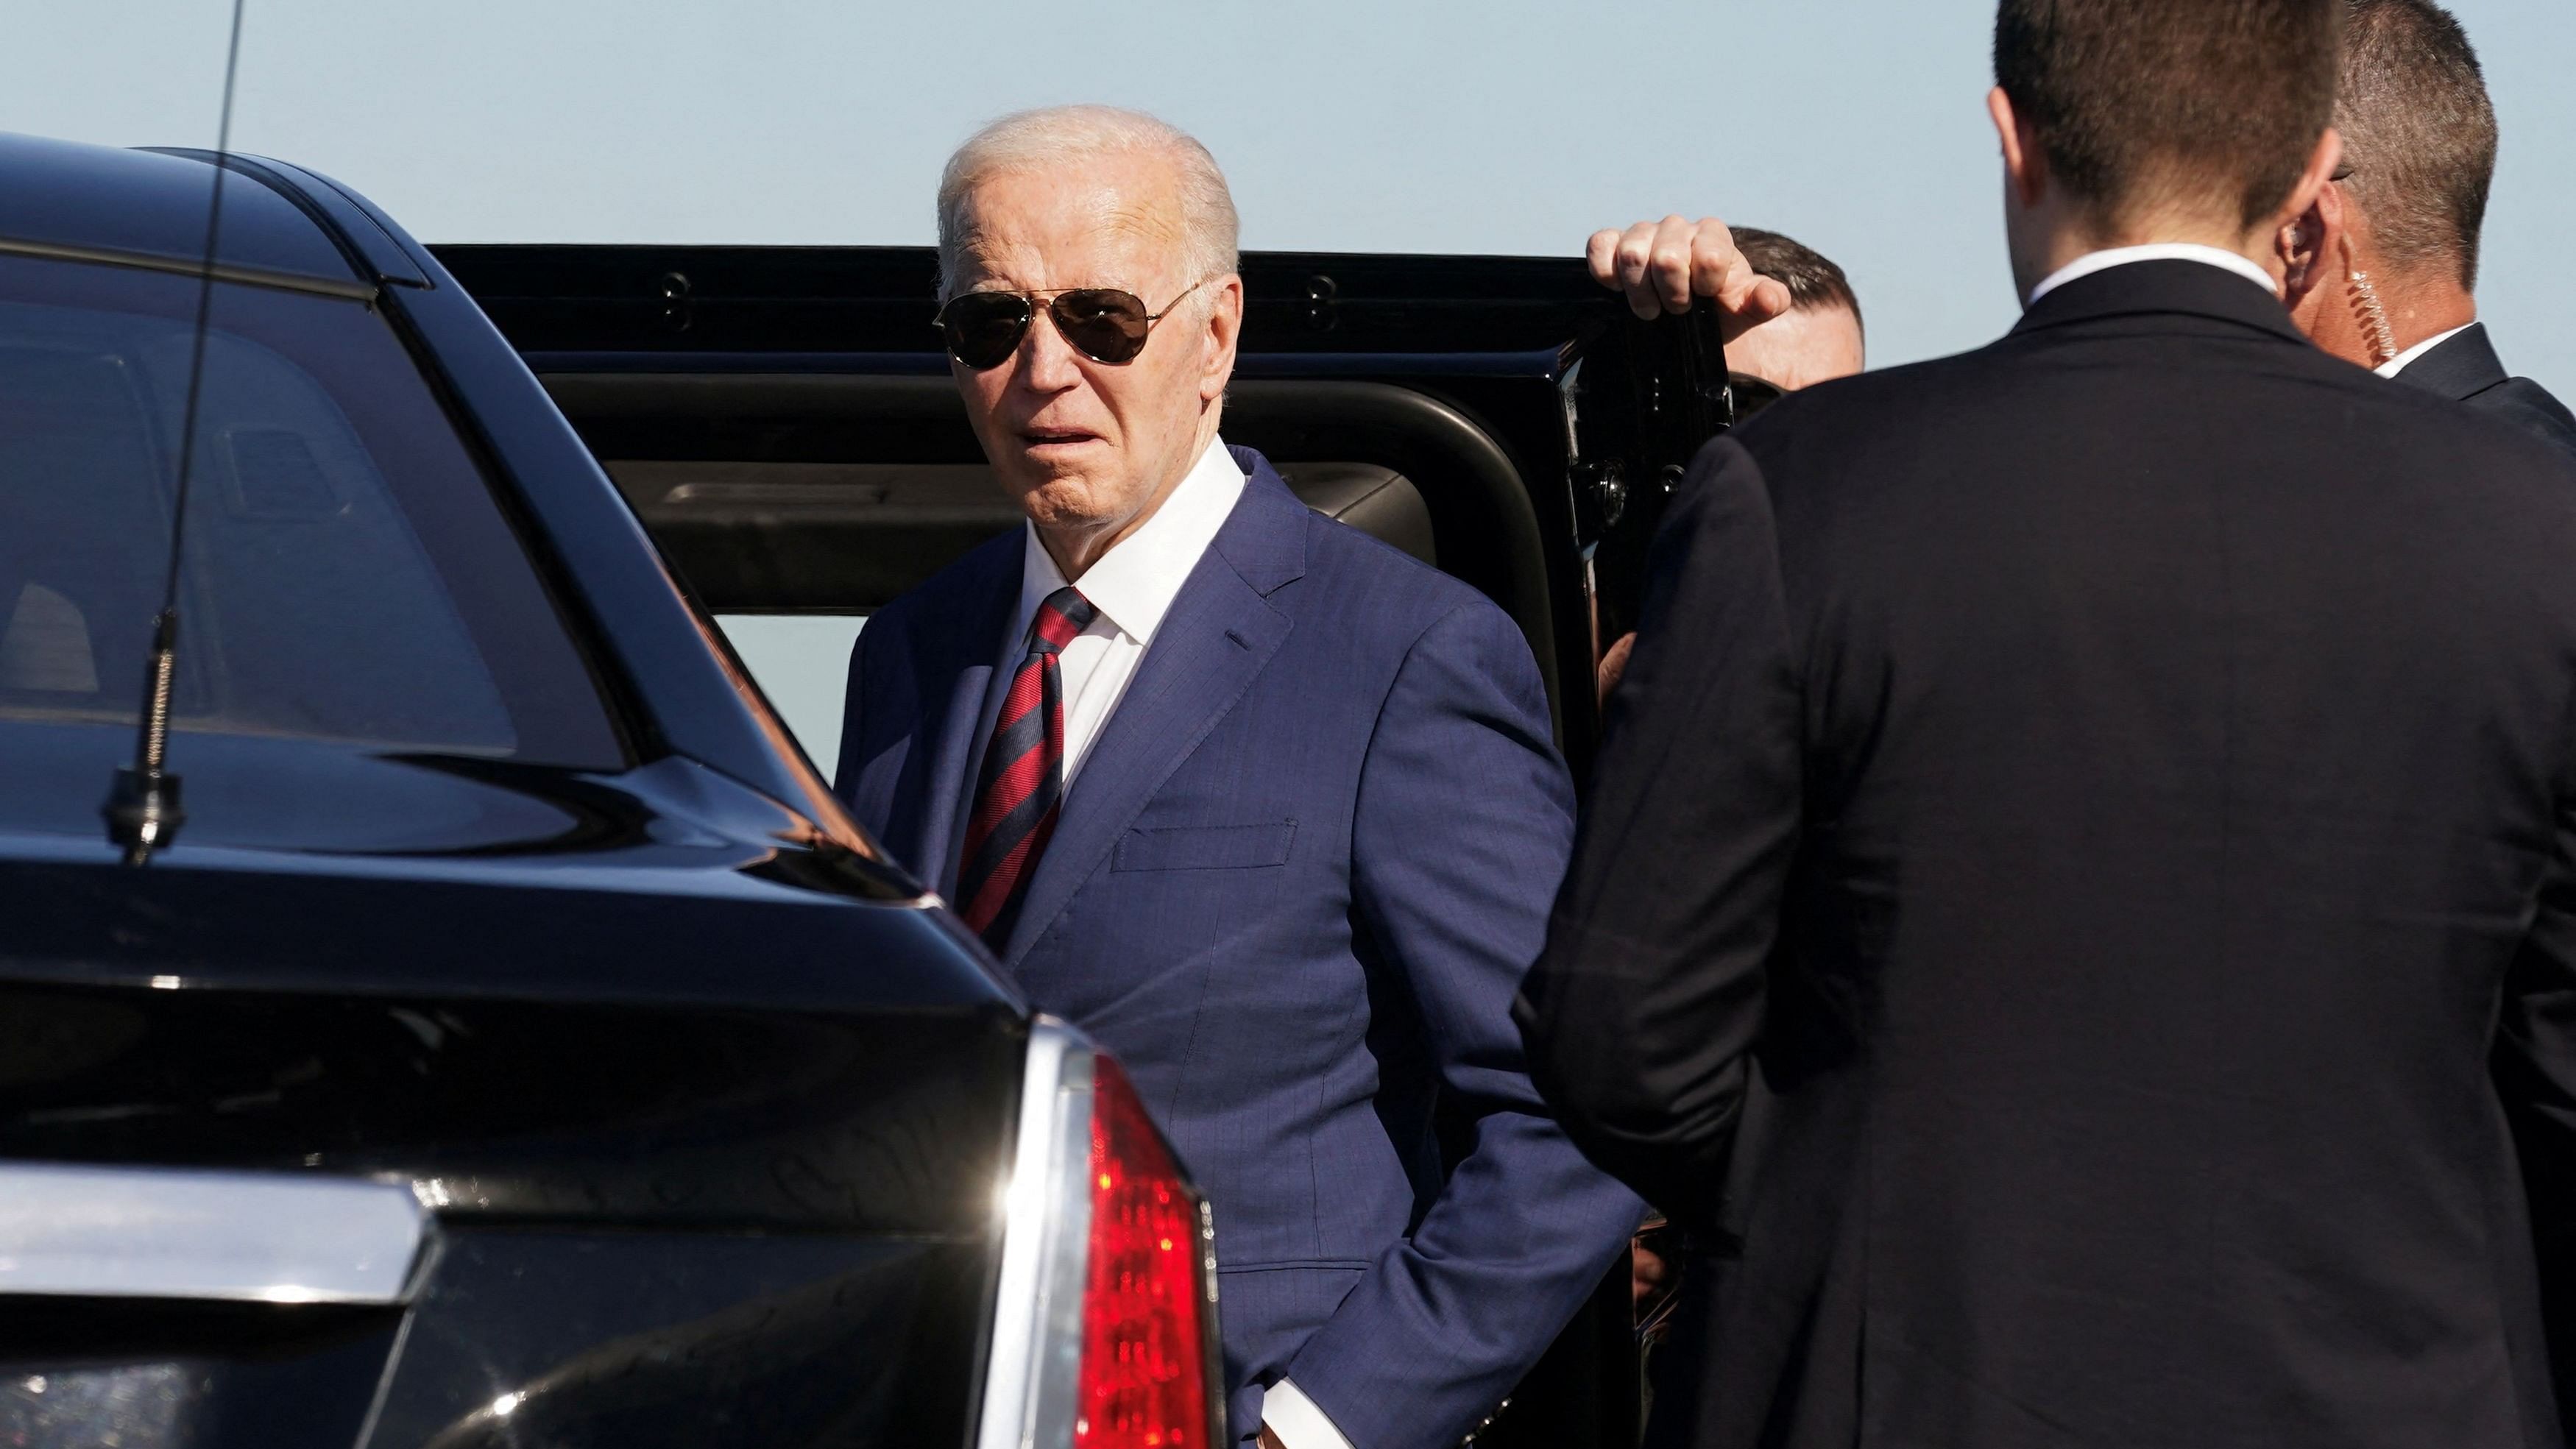 <div class="paragraphs"><p>U.S. President Joe Biden steps into his limo upon his arrival in Seattle, Washington.</p></div>